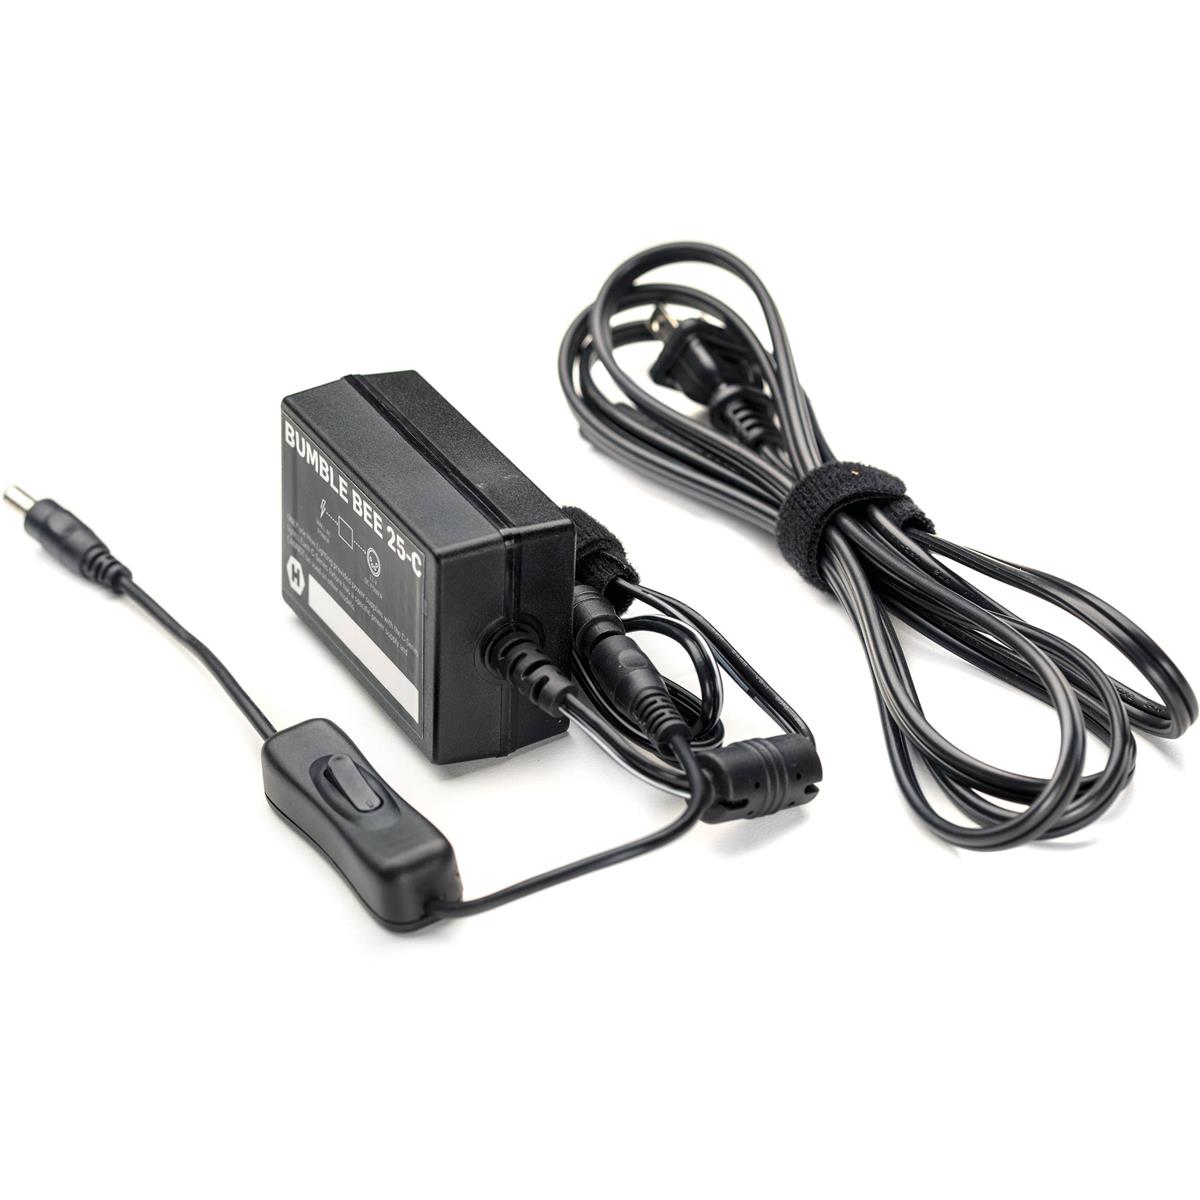 Image of Hive Universal AC Power Supply for Bumble Bee 25-C LED Light